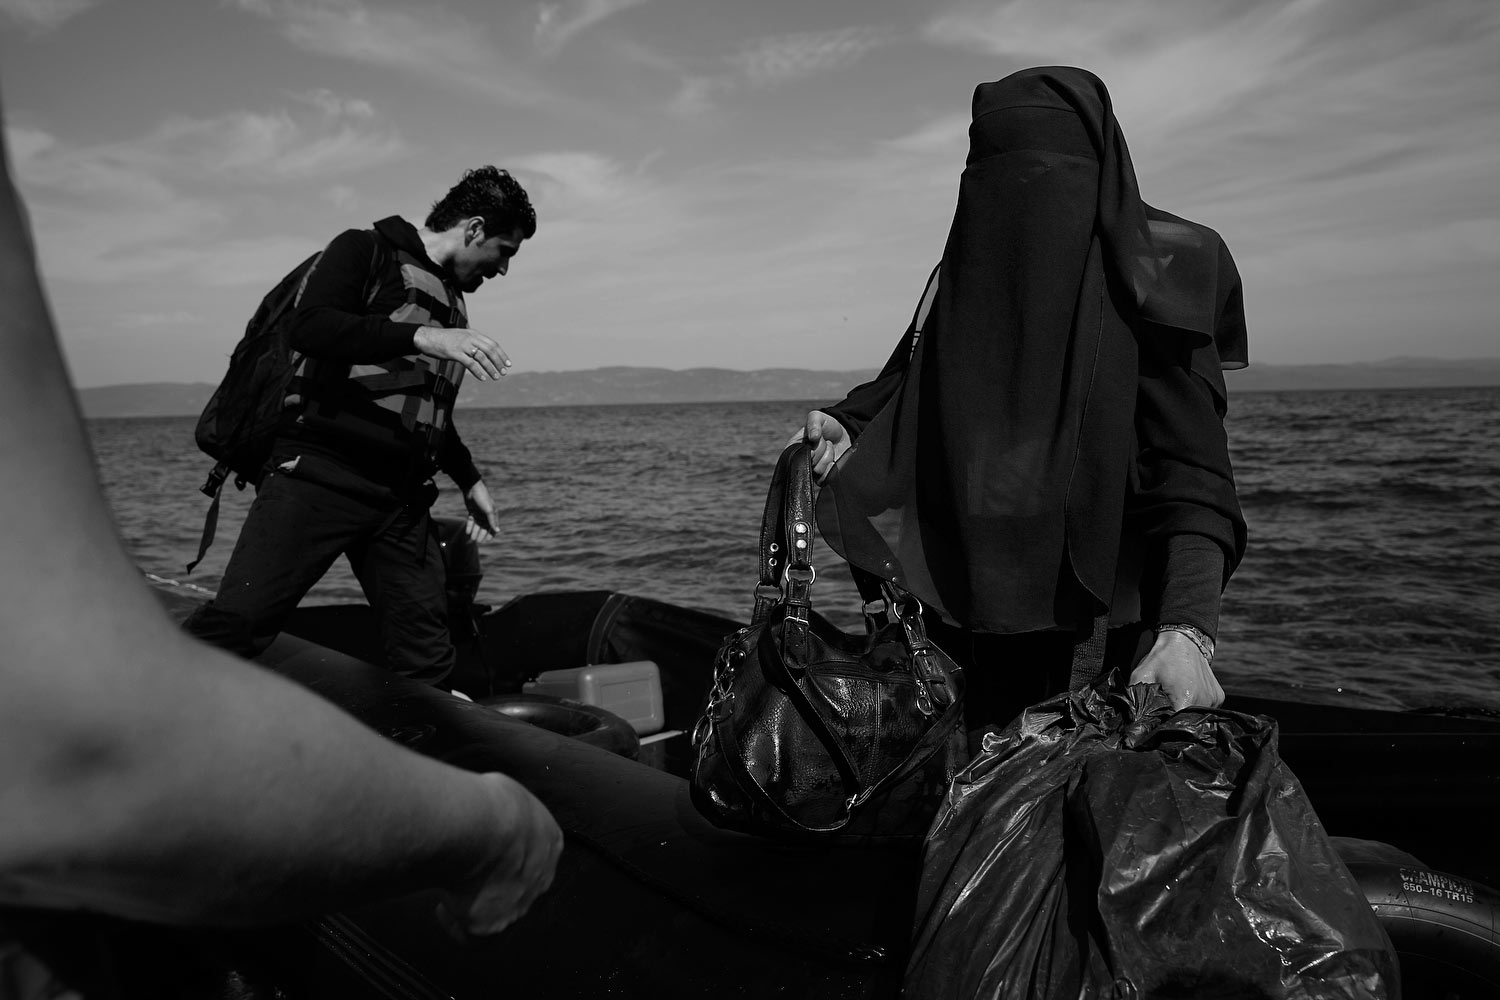 A veiled muslim woman carries both a handbag and garbage bag while getting off an inflatable boat after arriving on the beach in Lesbos, Greece, September 26, 2015. James Nachtwey for TIME